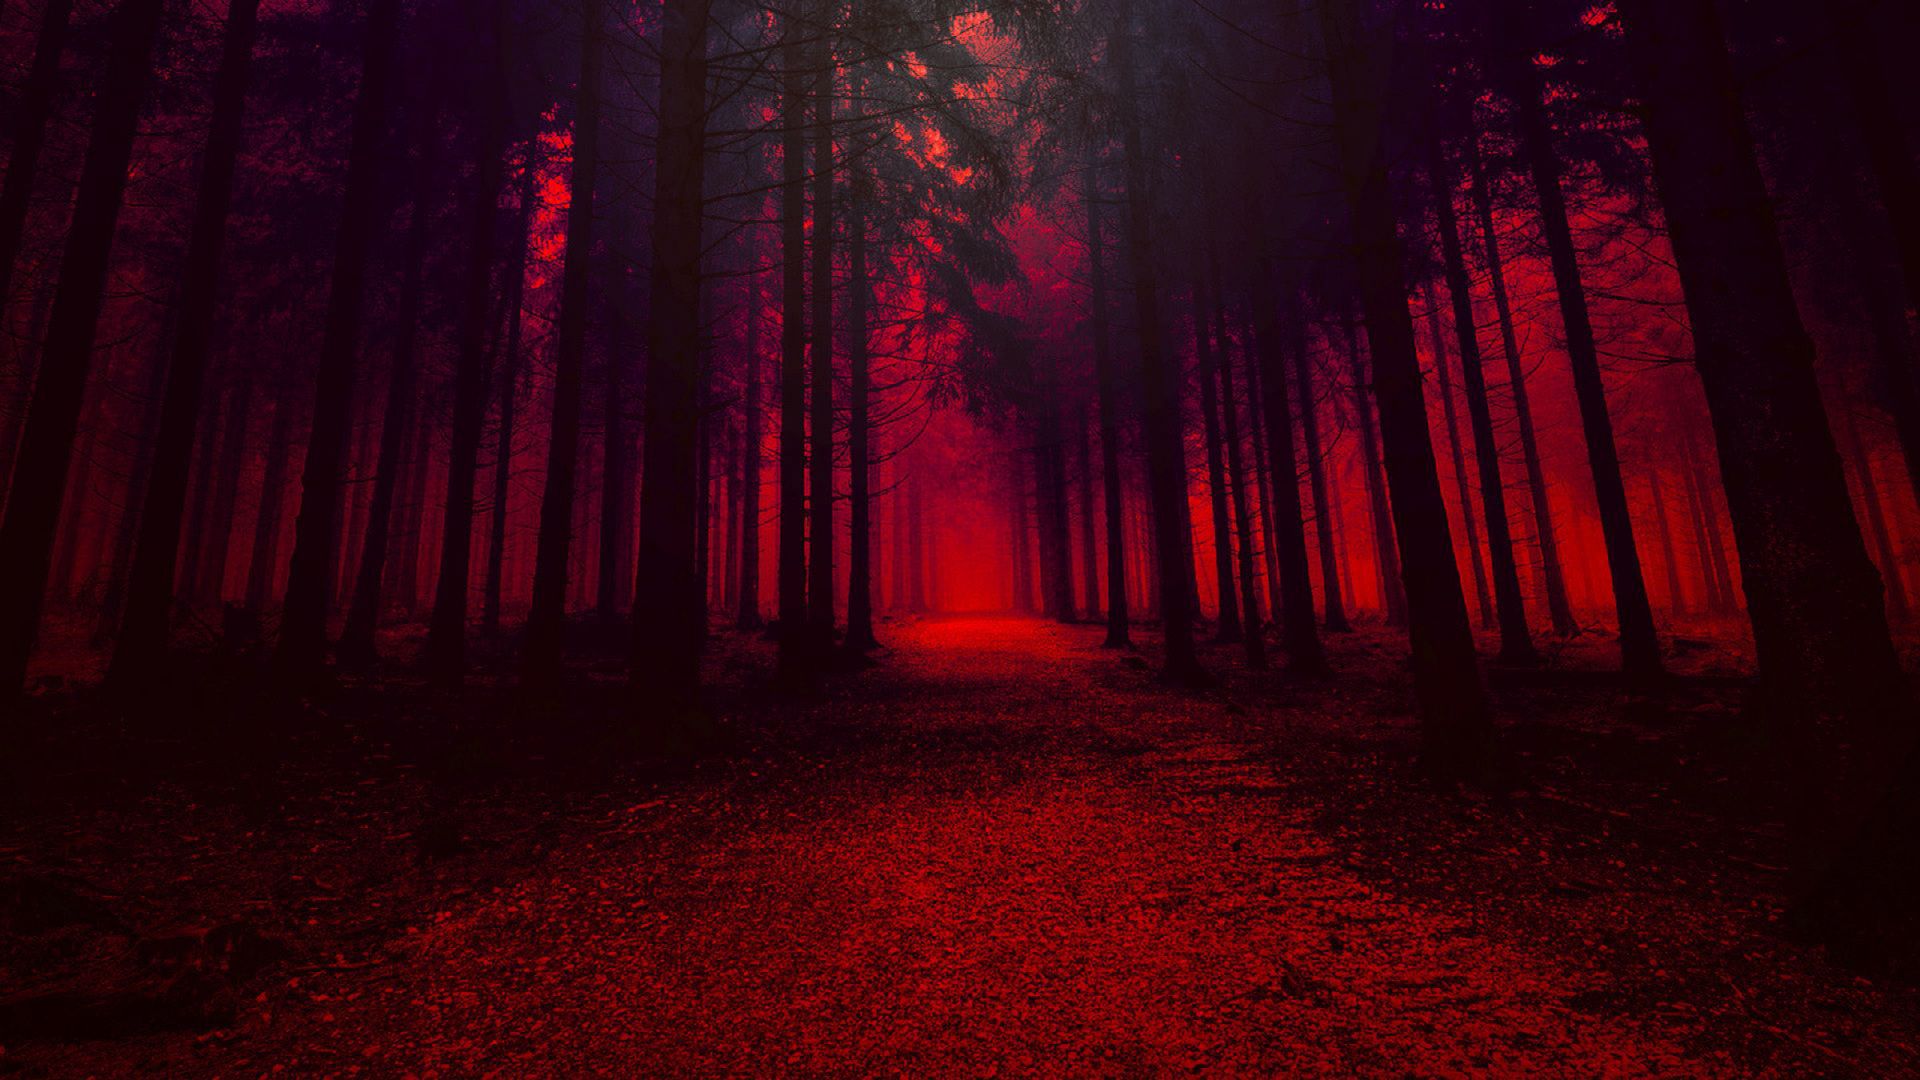 Desktop Wallpaper Red Theme, Forest, Pathway, Dark, Hd Image, Picture,  Background, 5606be